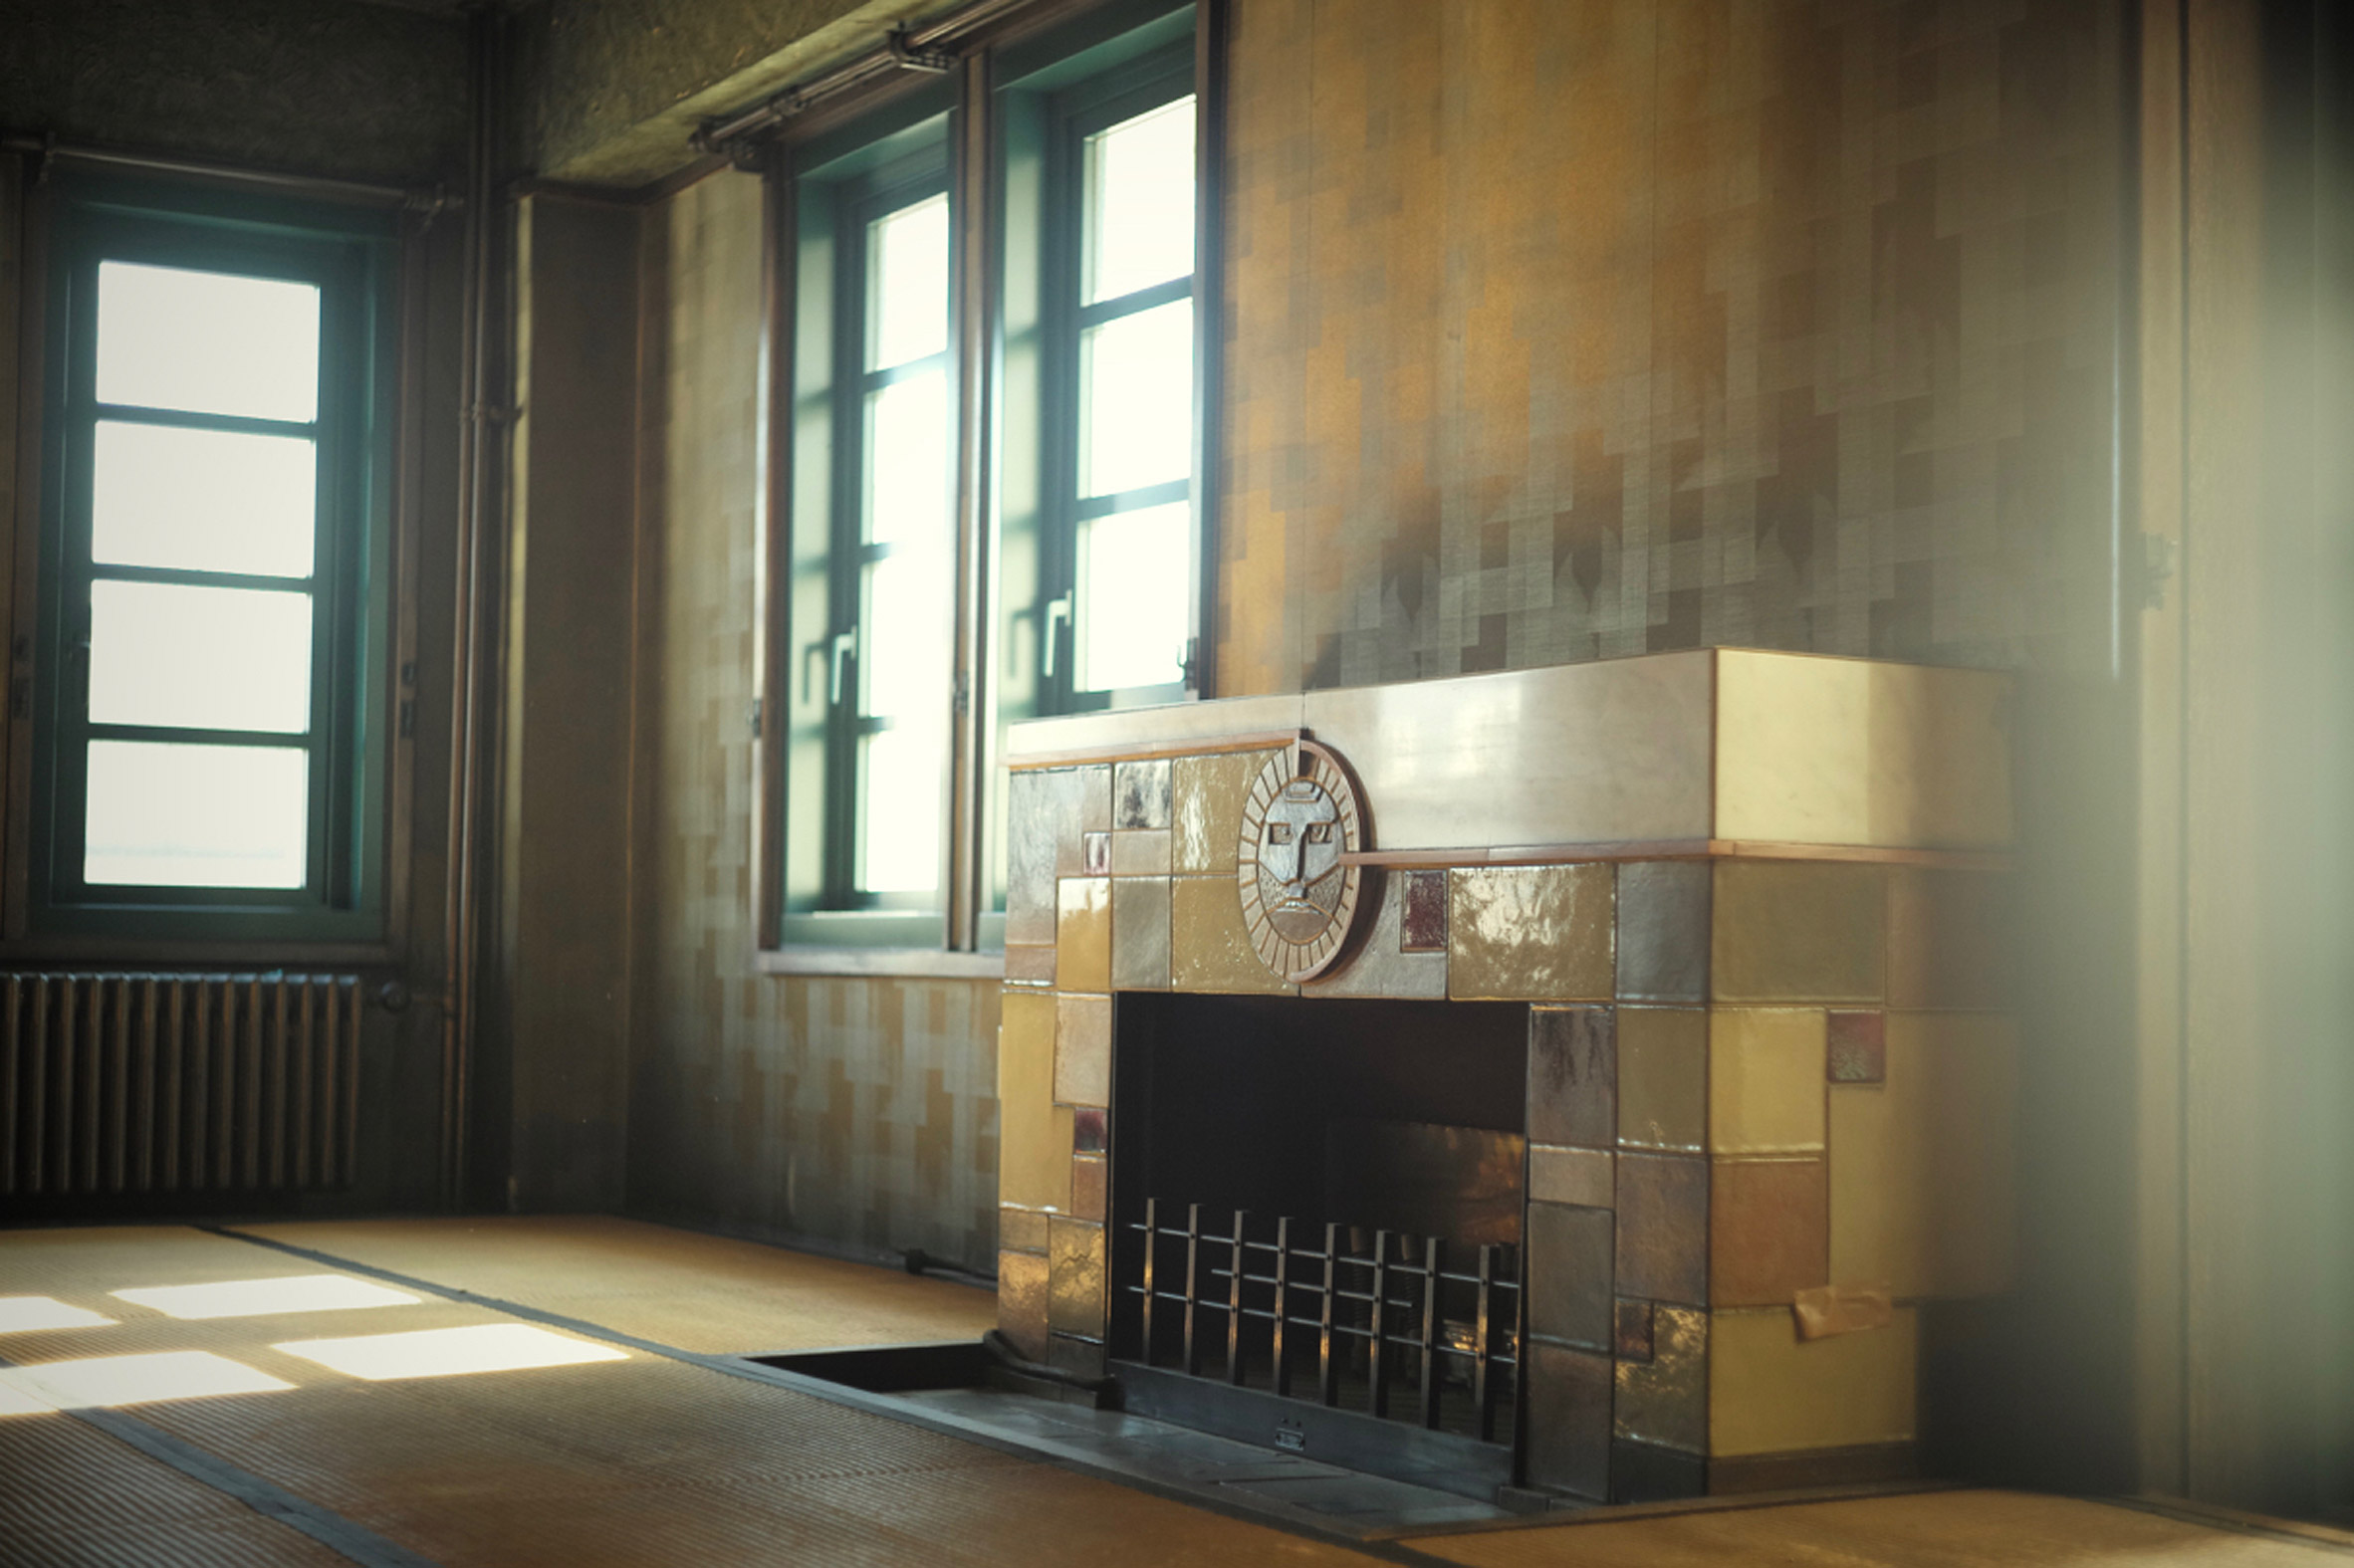 Fireplace in former Nintendo headquarters in Kyoto